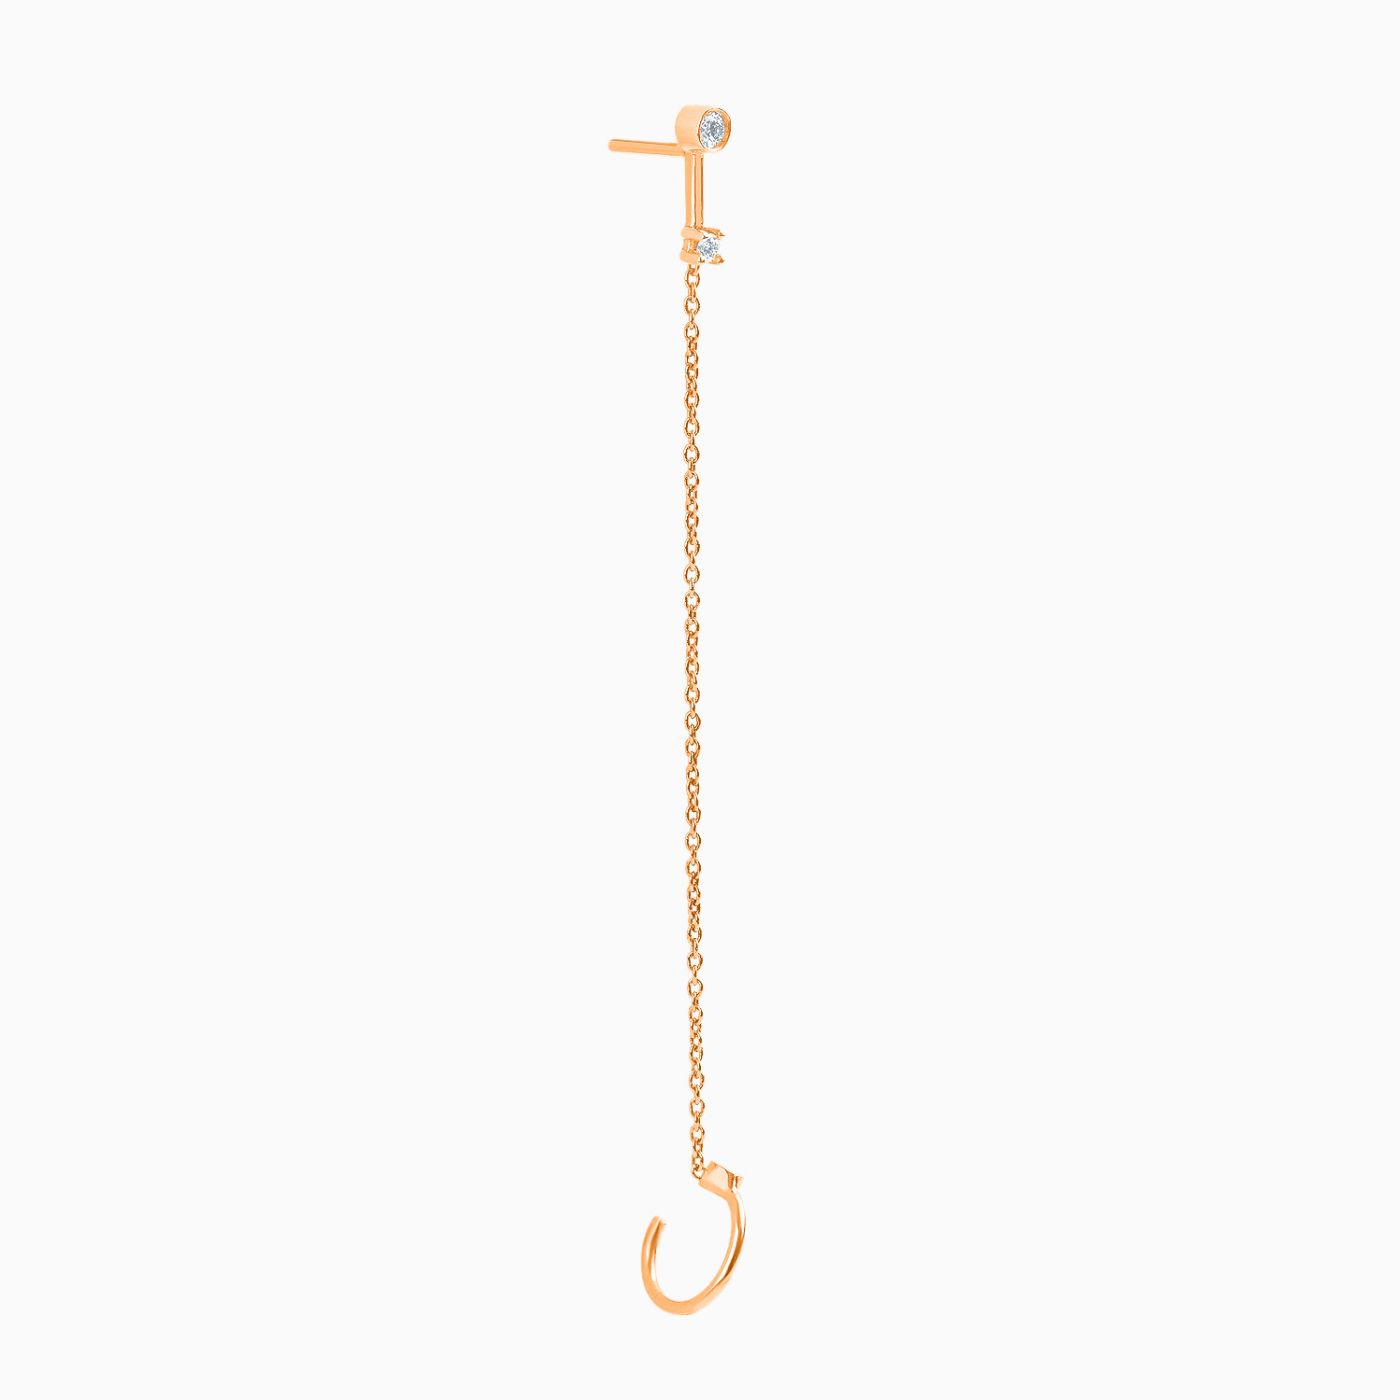 Half long rose gold chain earring with diamonds